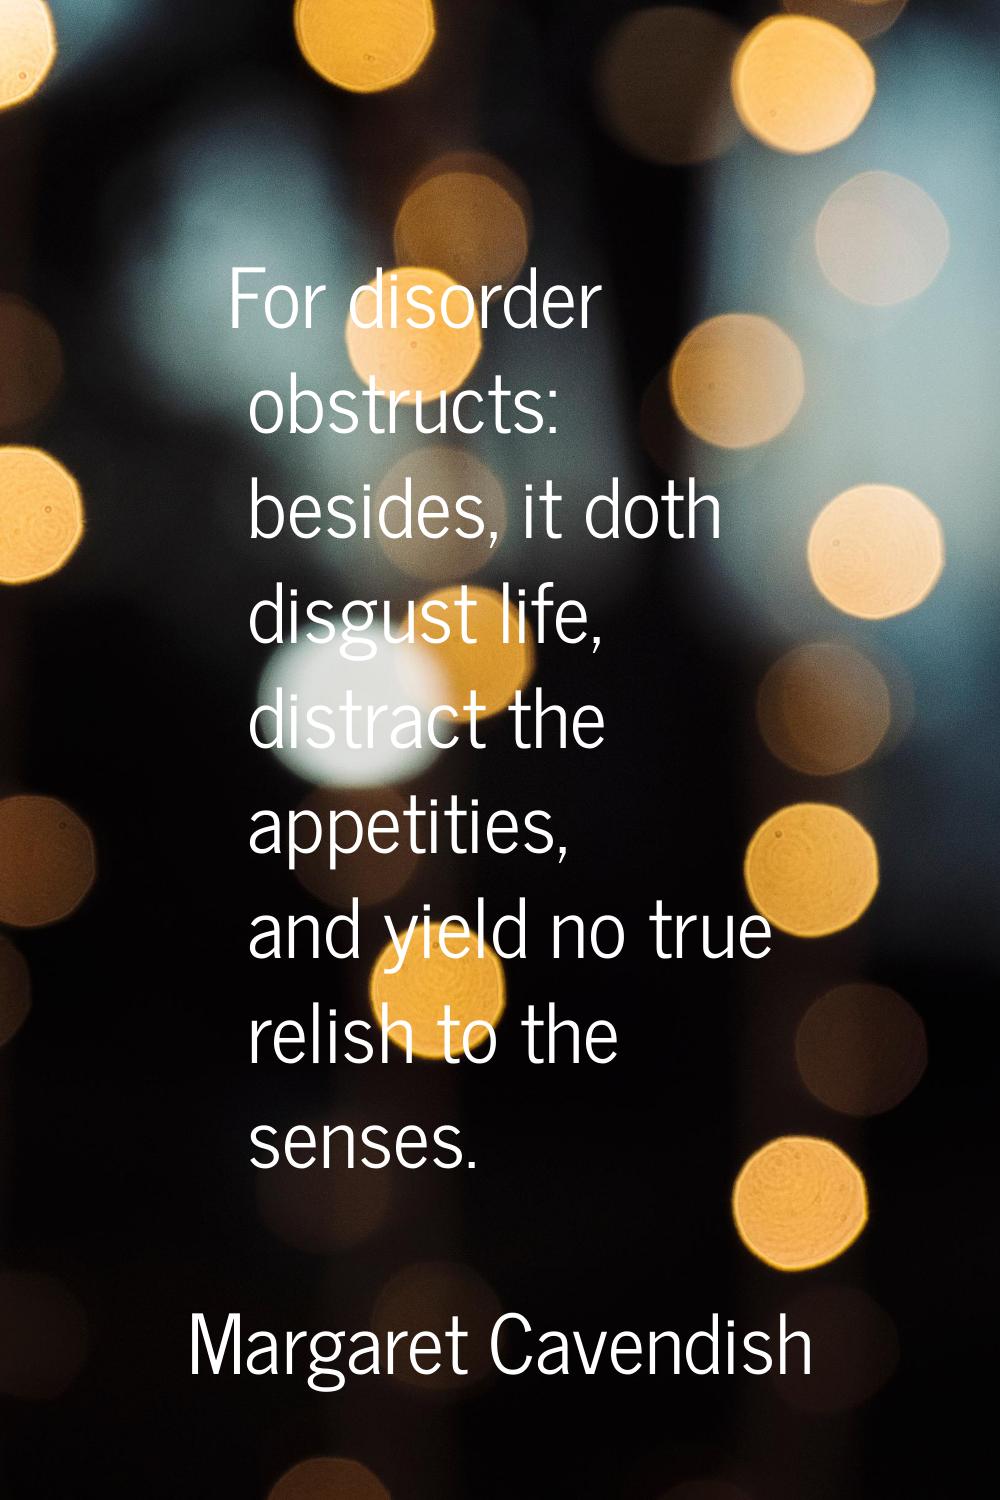 For disorder obstructs: besides, it doth disgust life, distract the appetities, and yield no true r